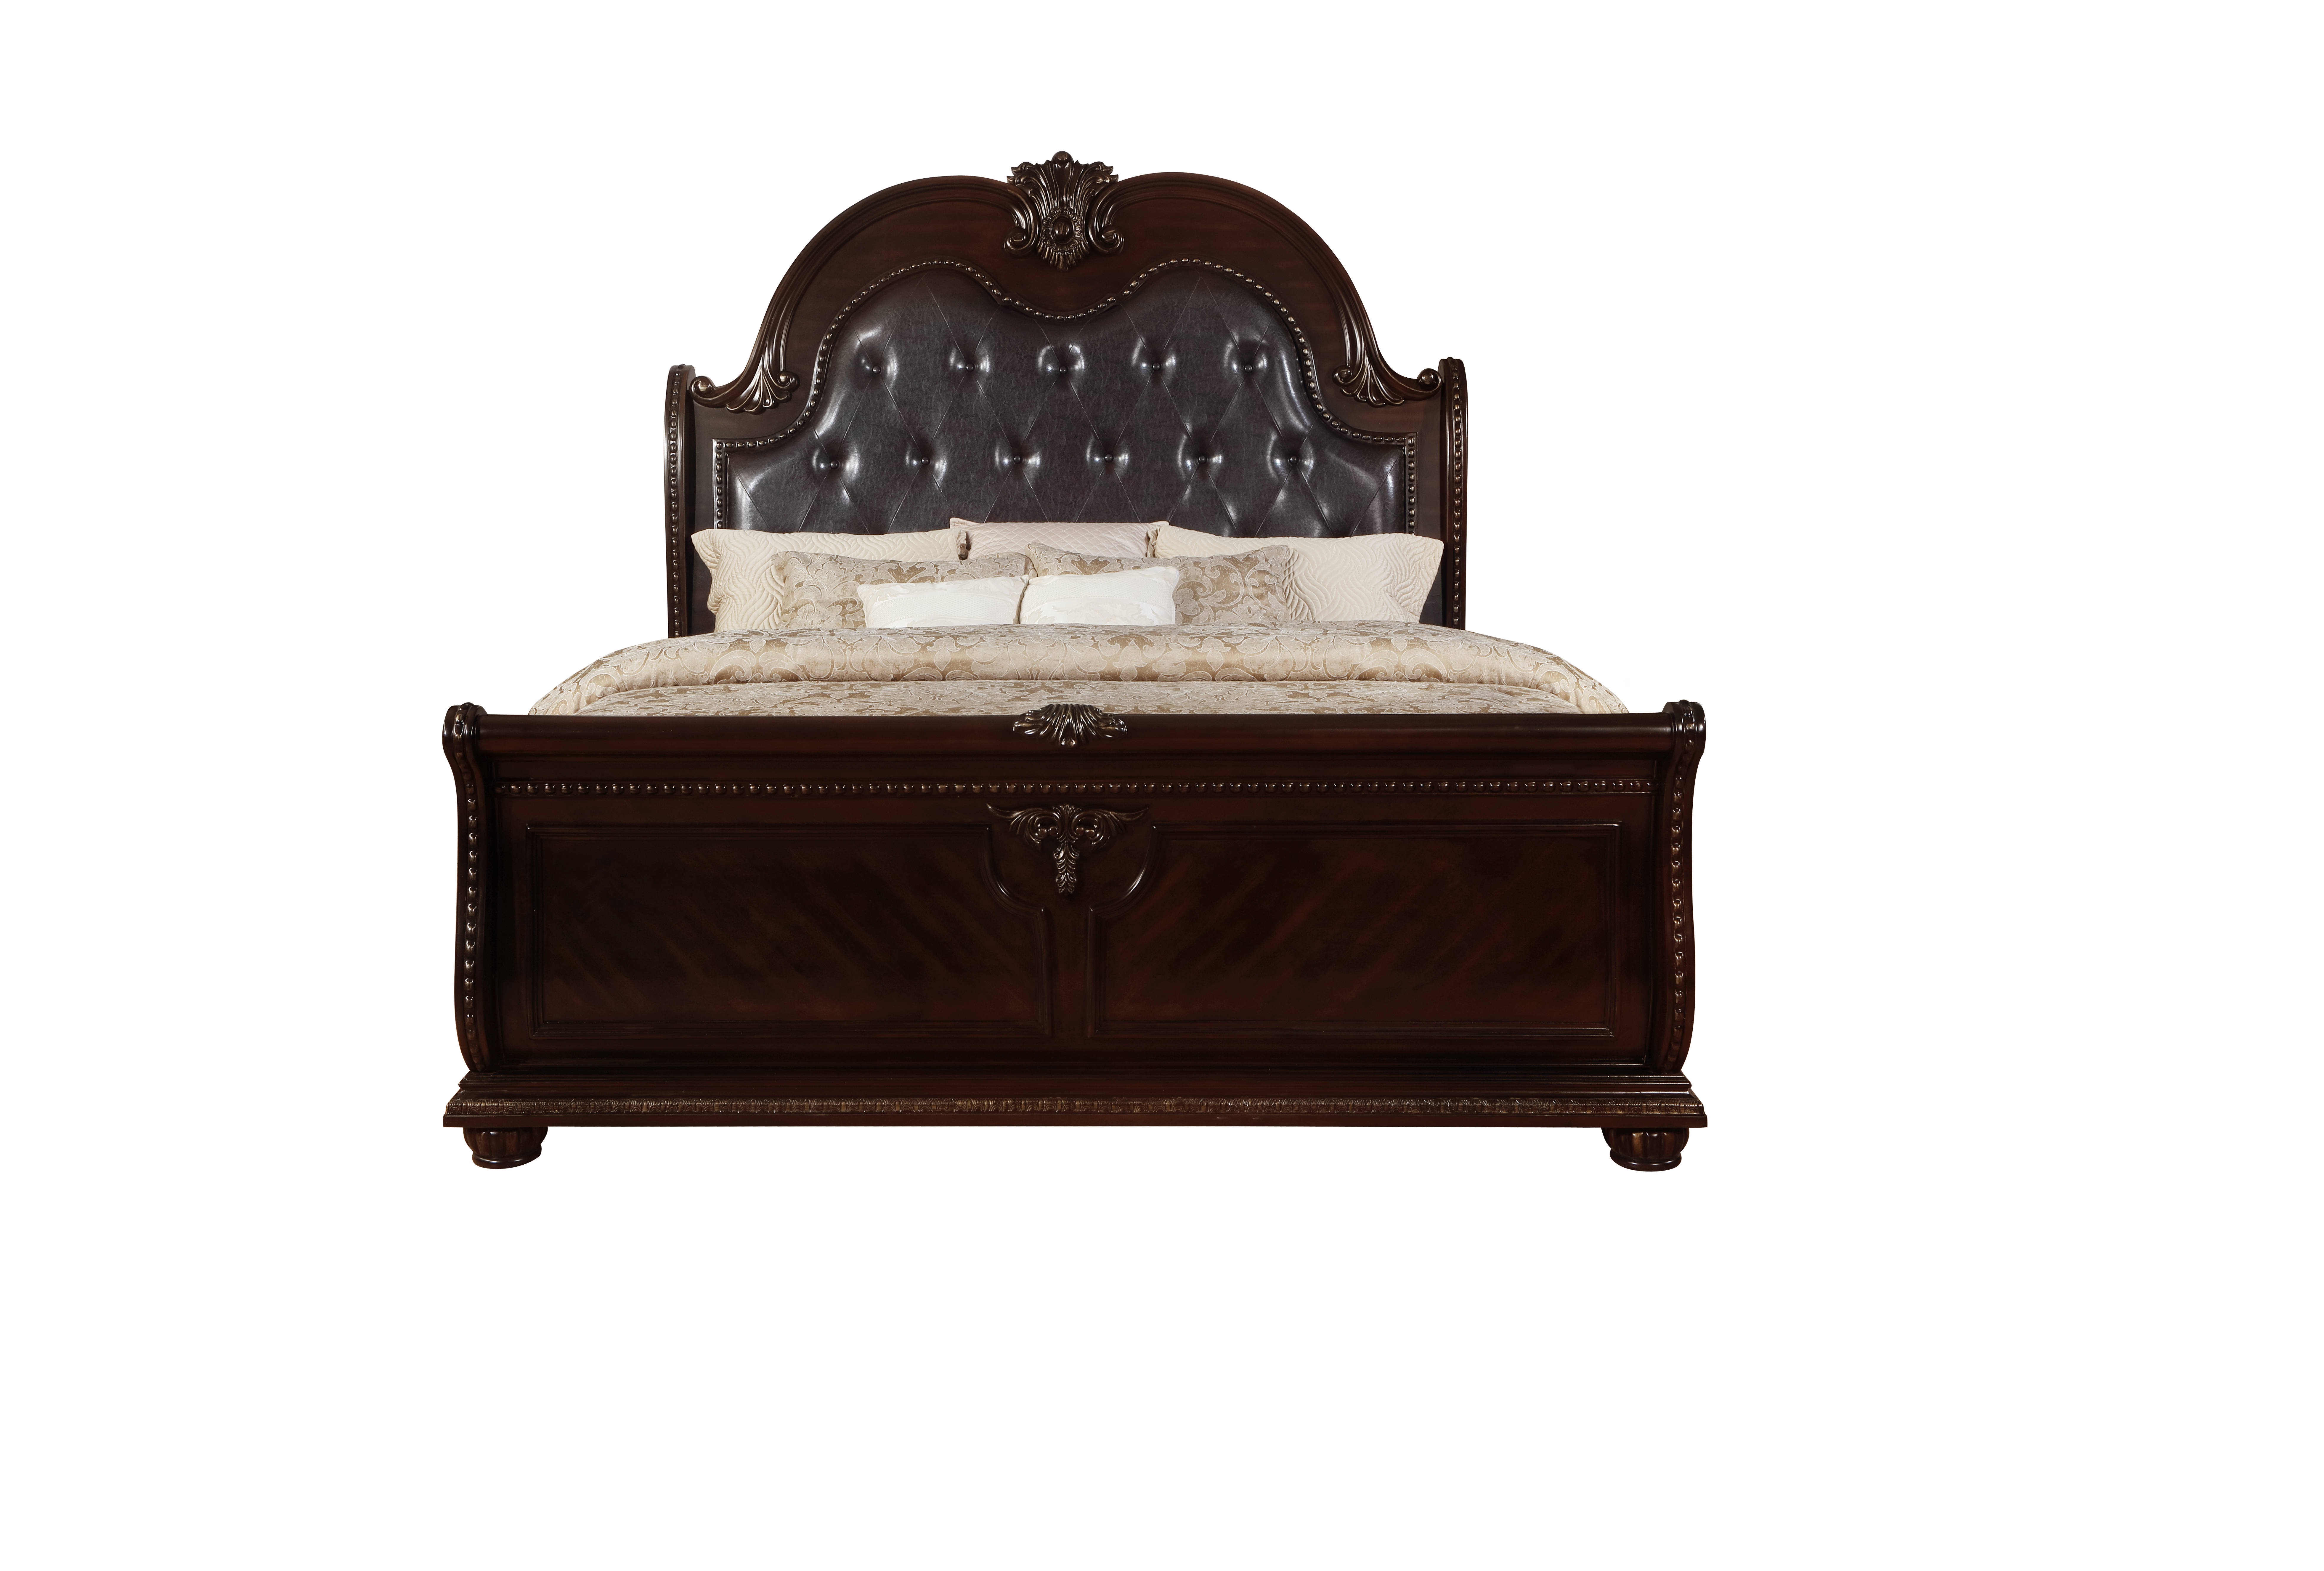 New Formal Traditional Design Marble Top King Size 4 Pieces Set Bedroom Furniture, Bed, Dresser, Mirror, Nightstand - image 3 of 8